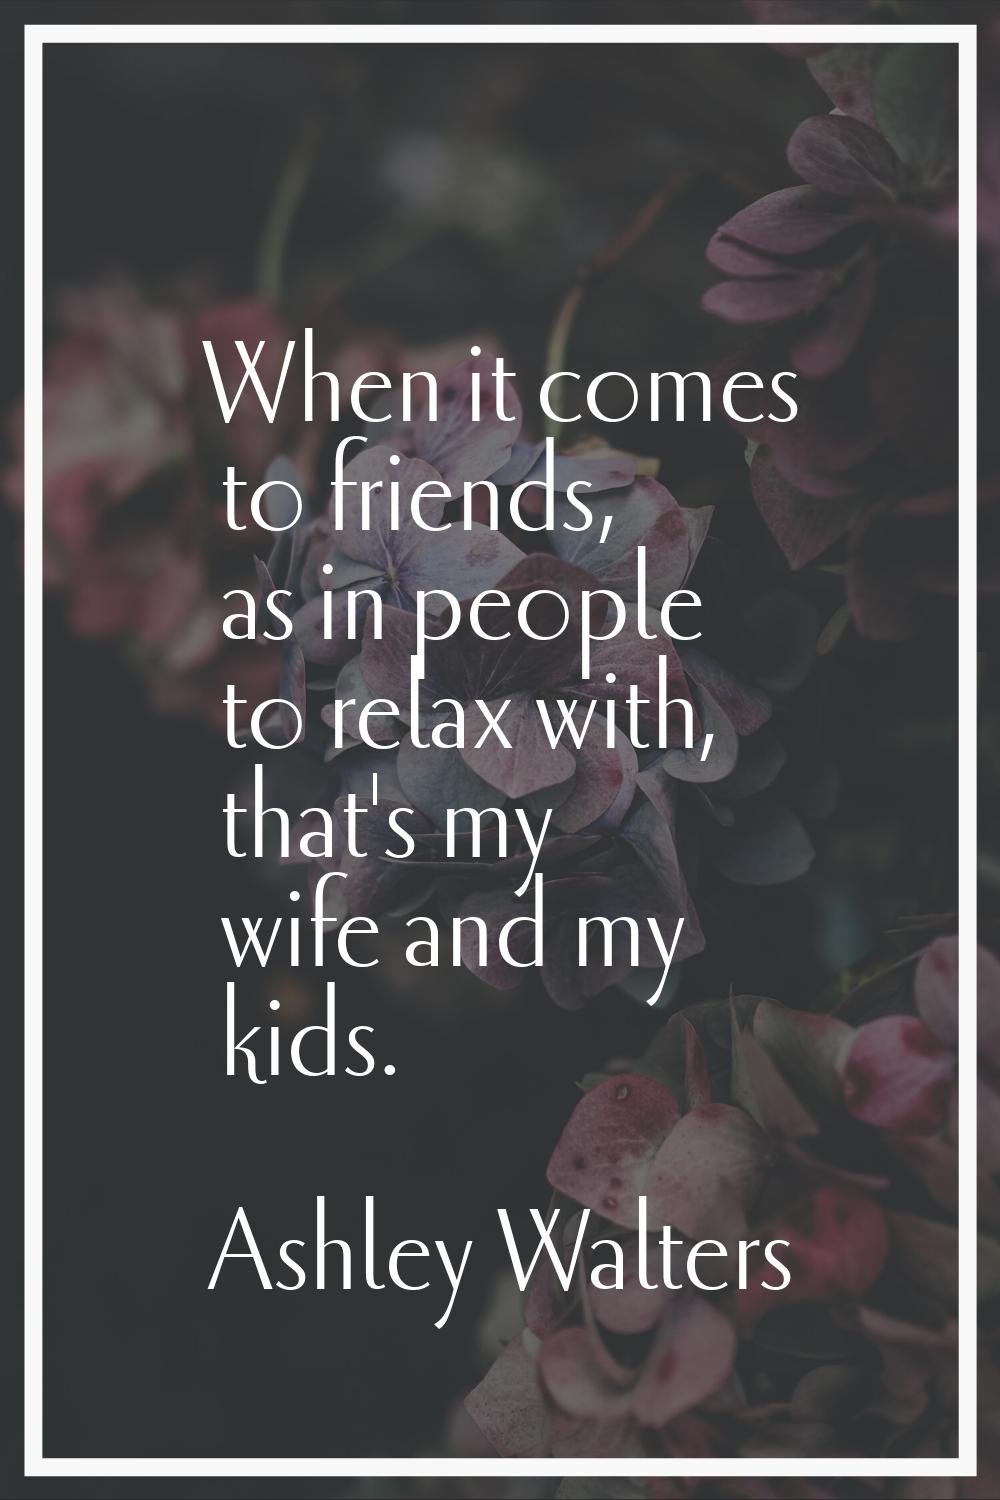 When it comes to friends, as in people to relax with, that's my wife and my kids.